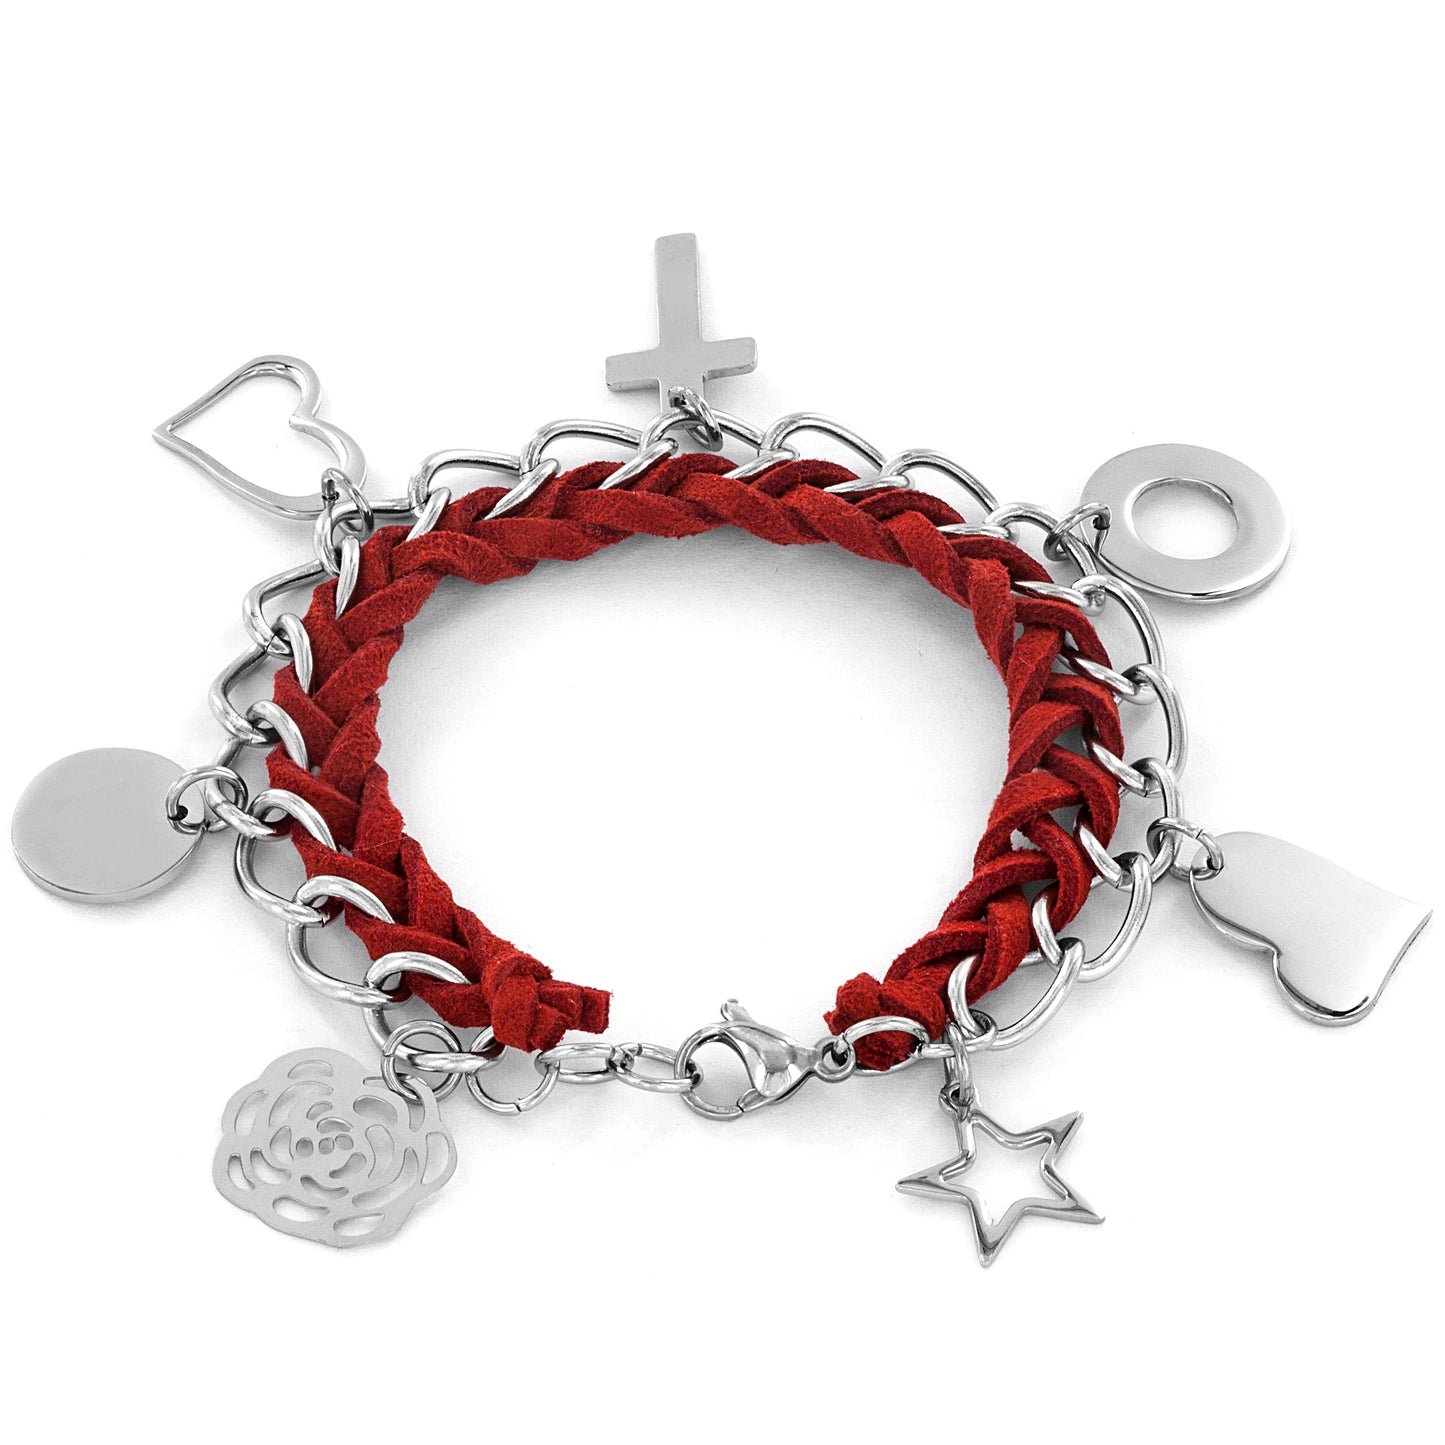 ELYA Love and Faith Charms Red Woven Leather Stainless Steel Bracelet (14 mm) - 7.5"